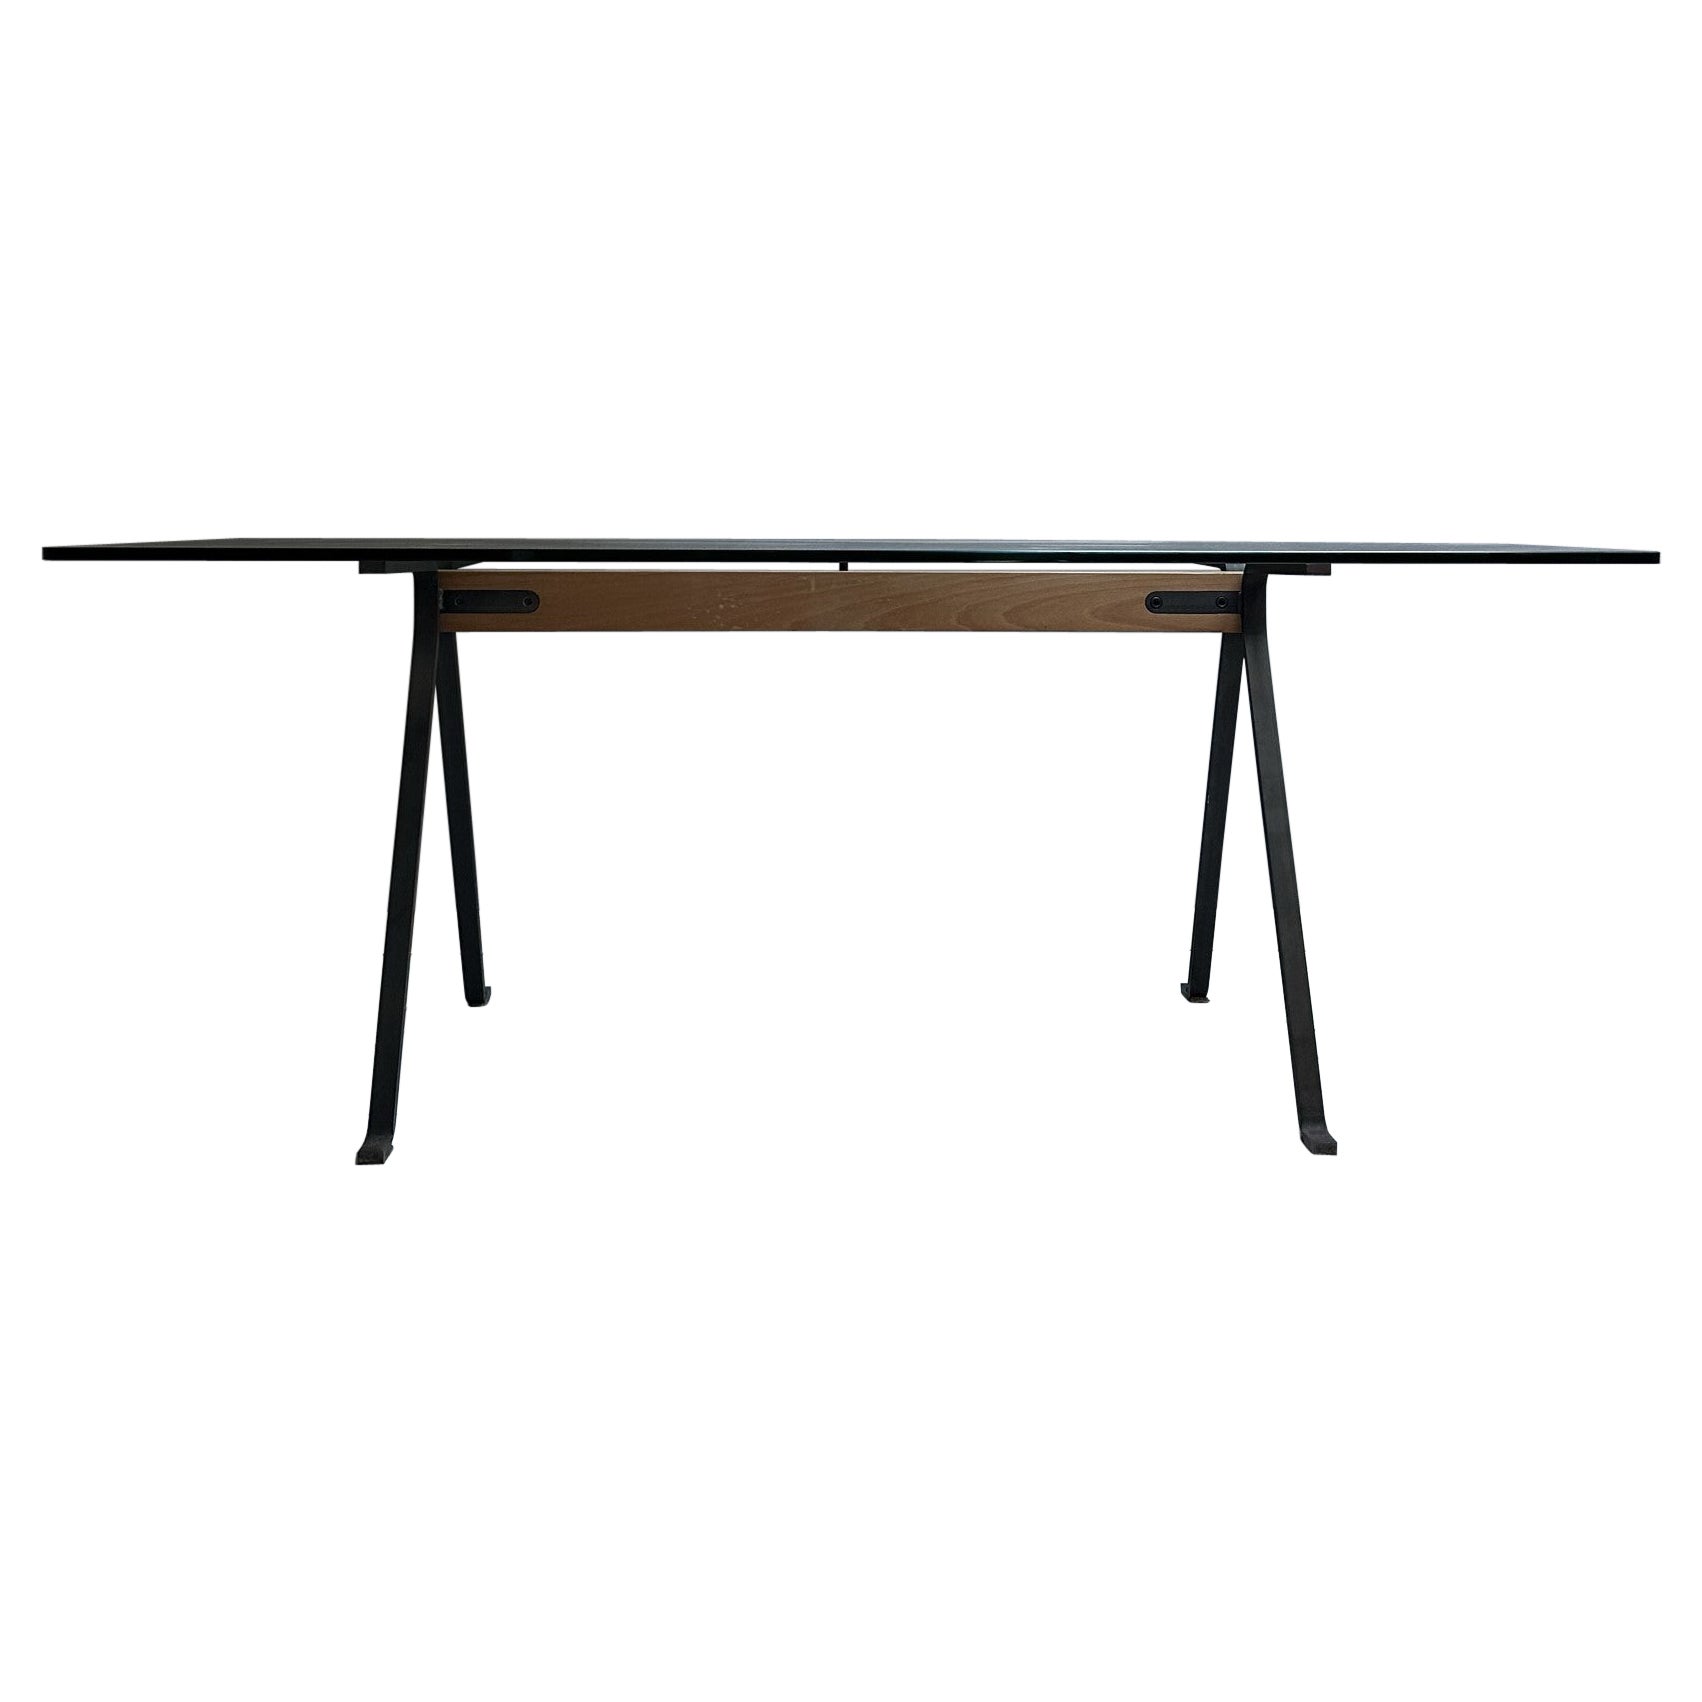 Dining table mod. Frate, designed by Enzo Mari in 1973 produced by Driade For Sale